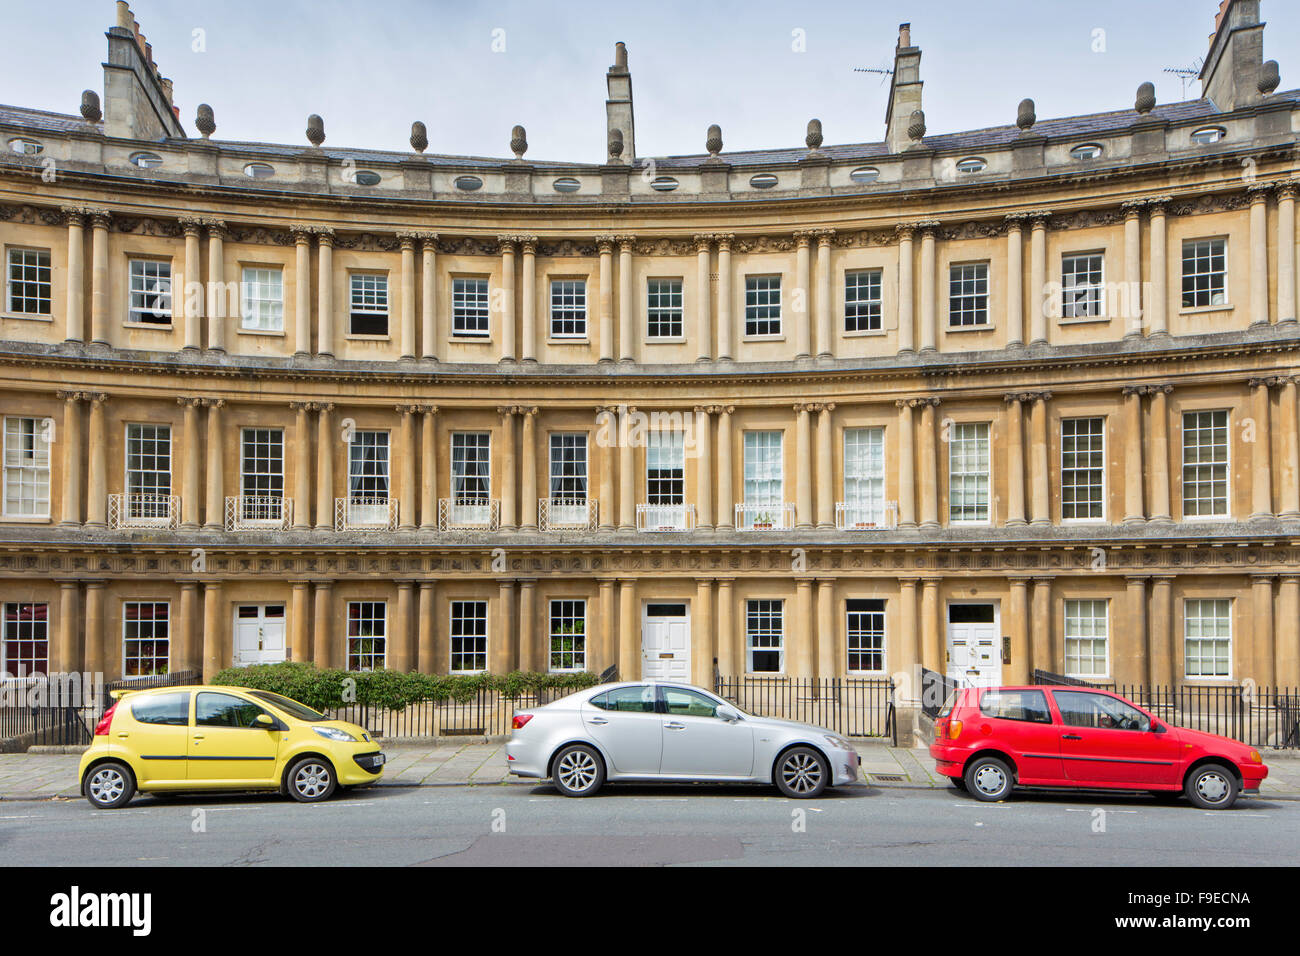 Cars parked in front of the Circus, Bath, Somerset, England, UK Stock Photo